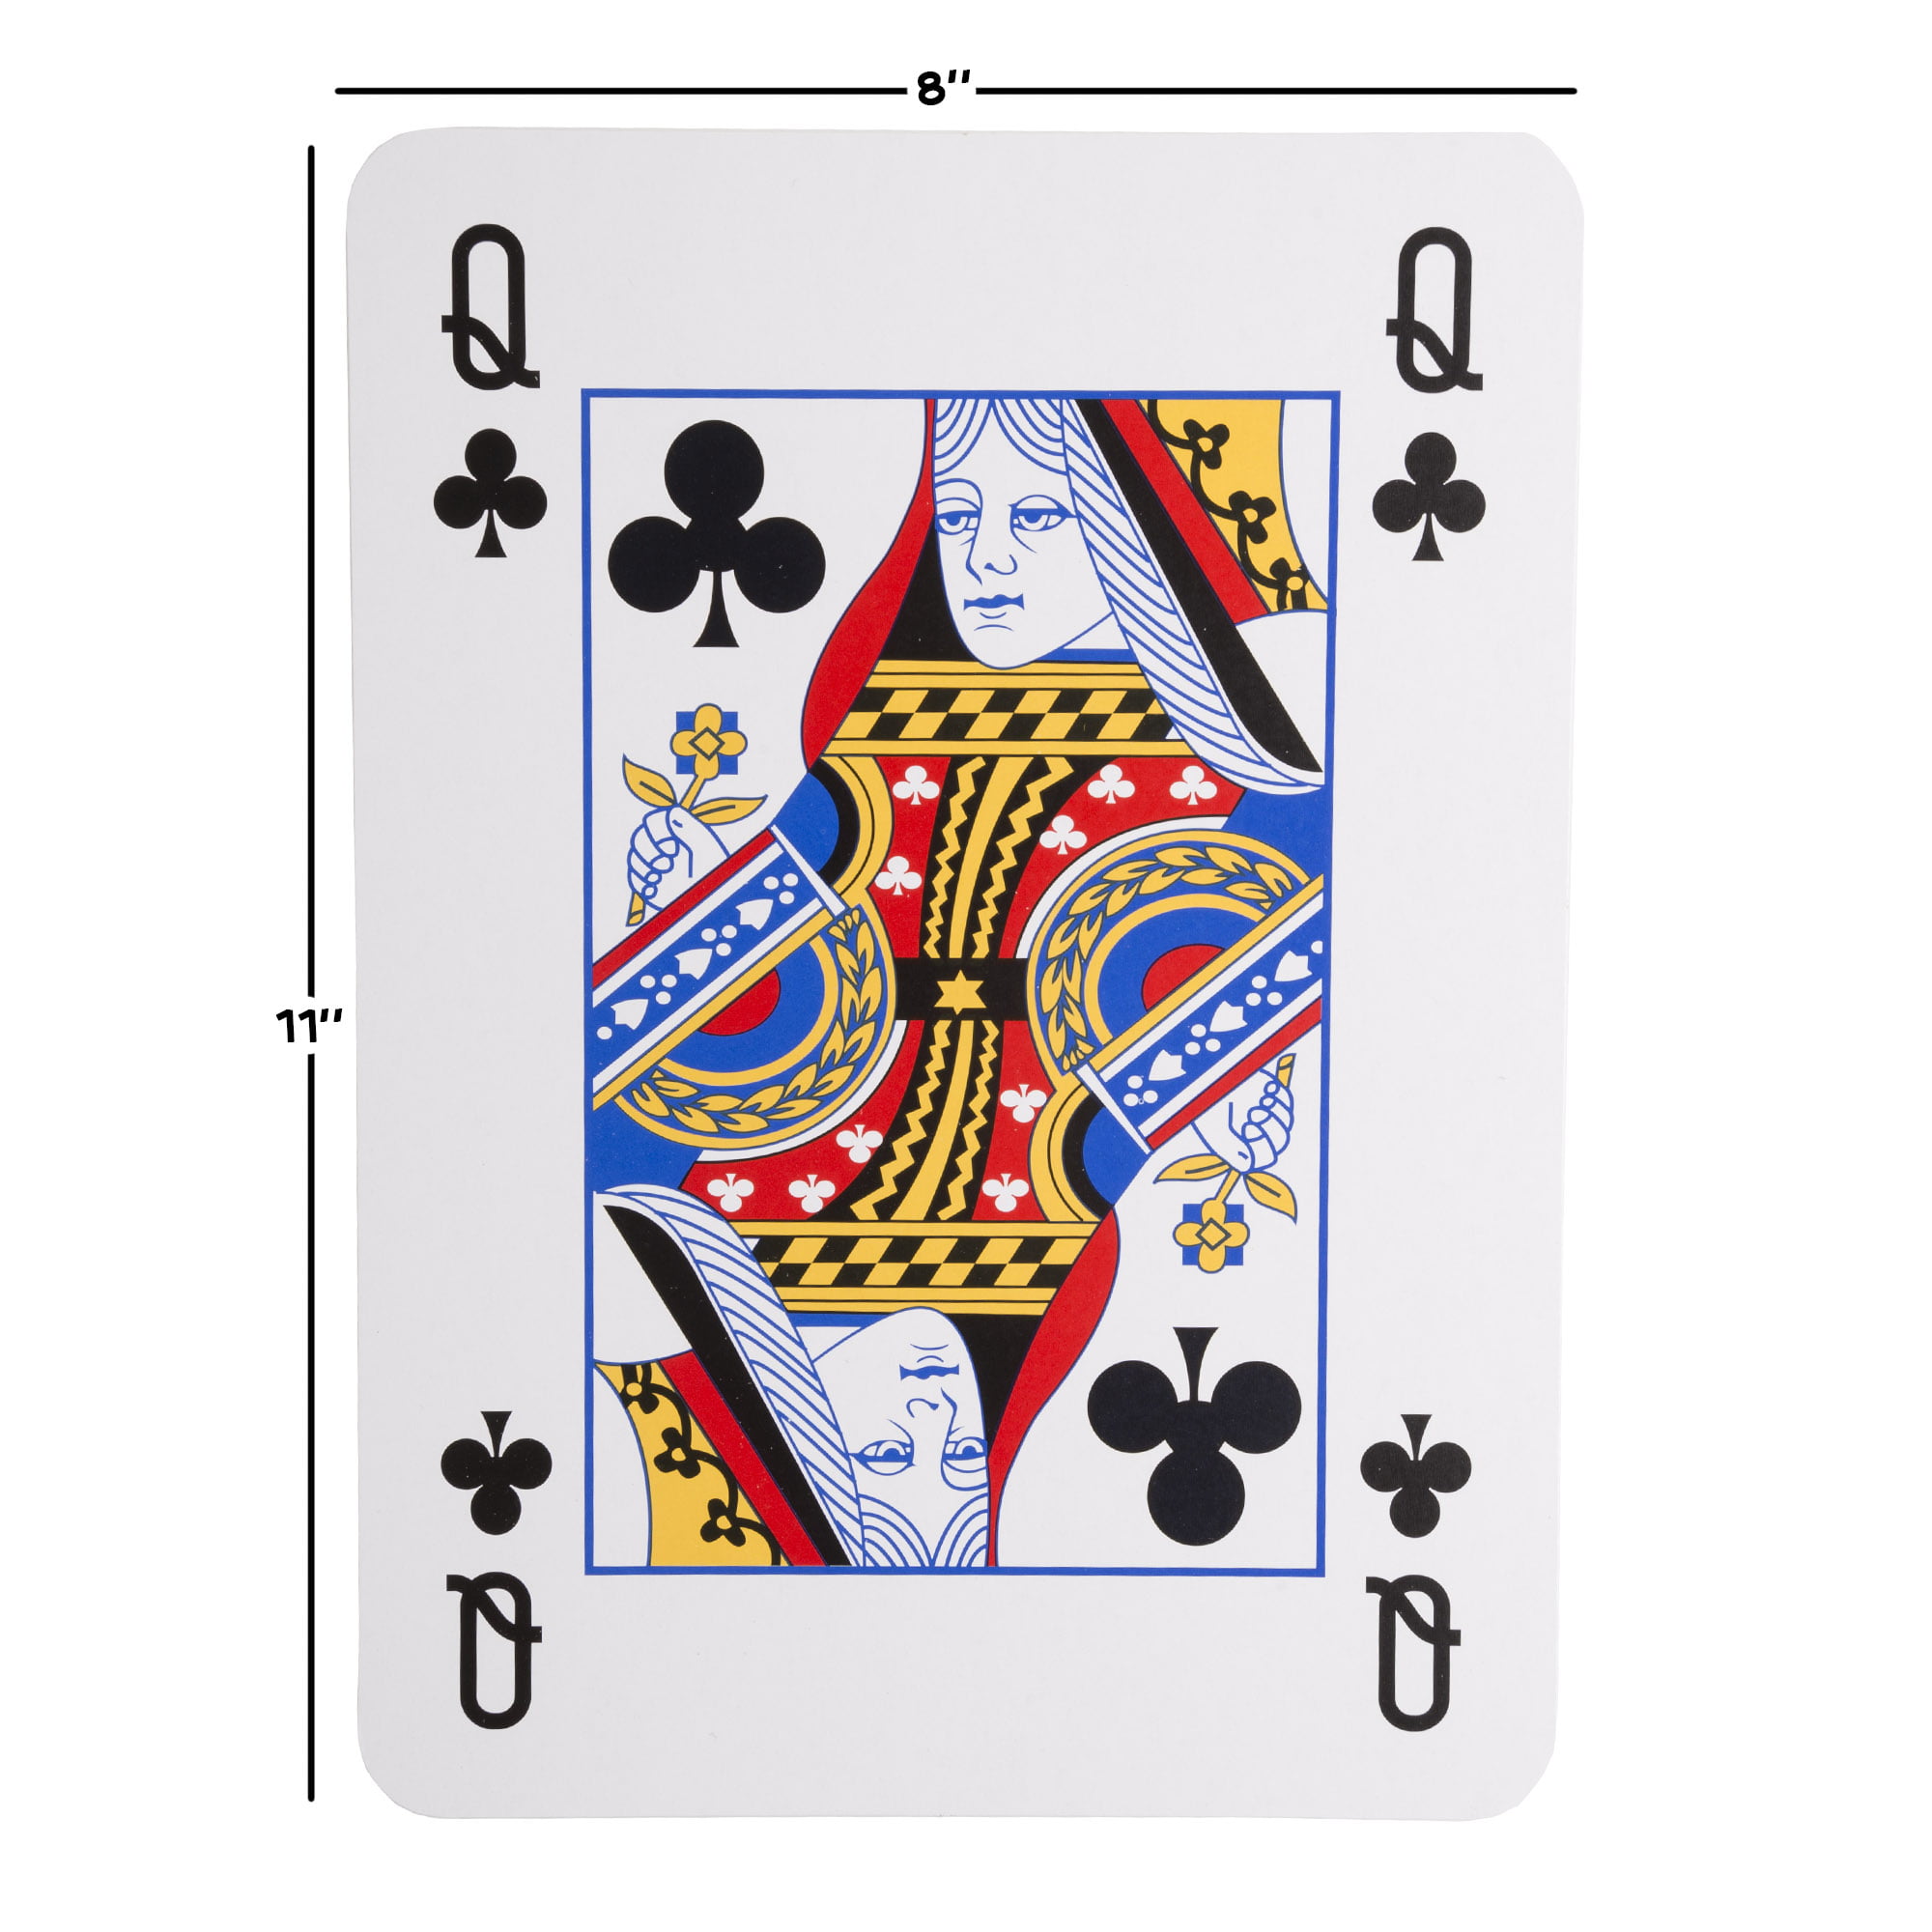 Details about   Poker Cards Jumbo Playing Cards Extra Large in 8 x 11 Inches 